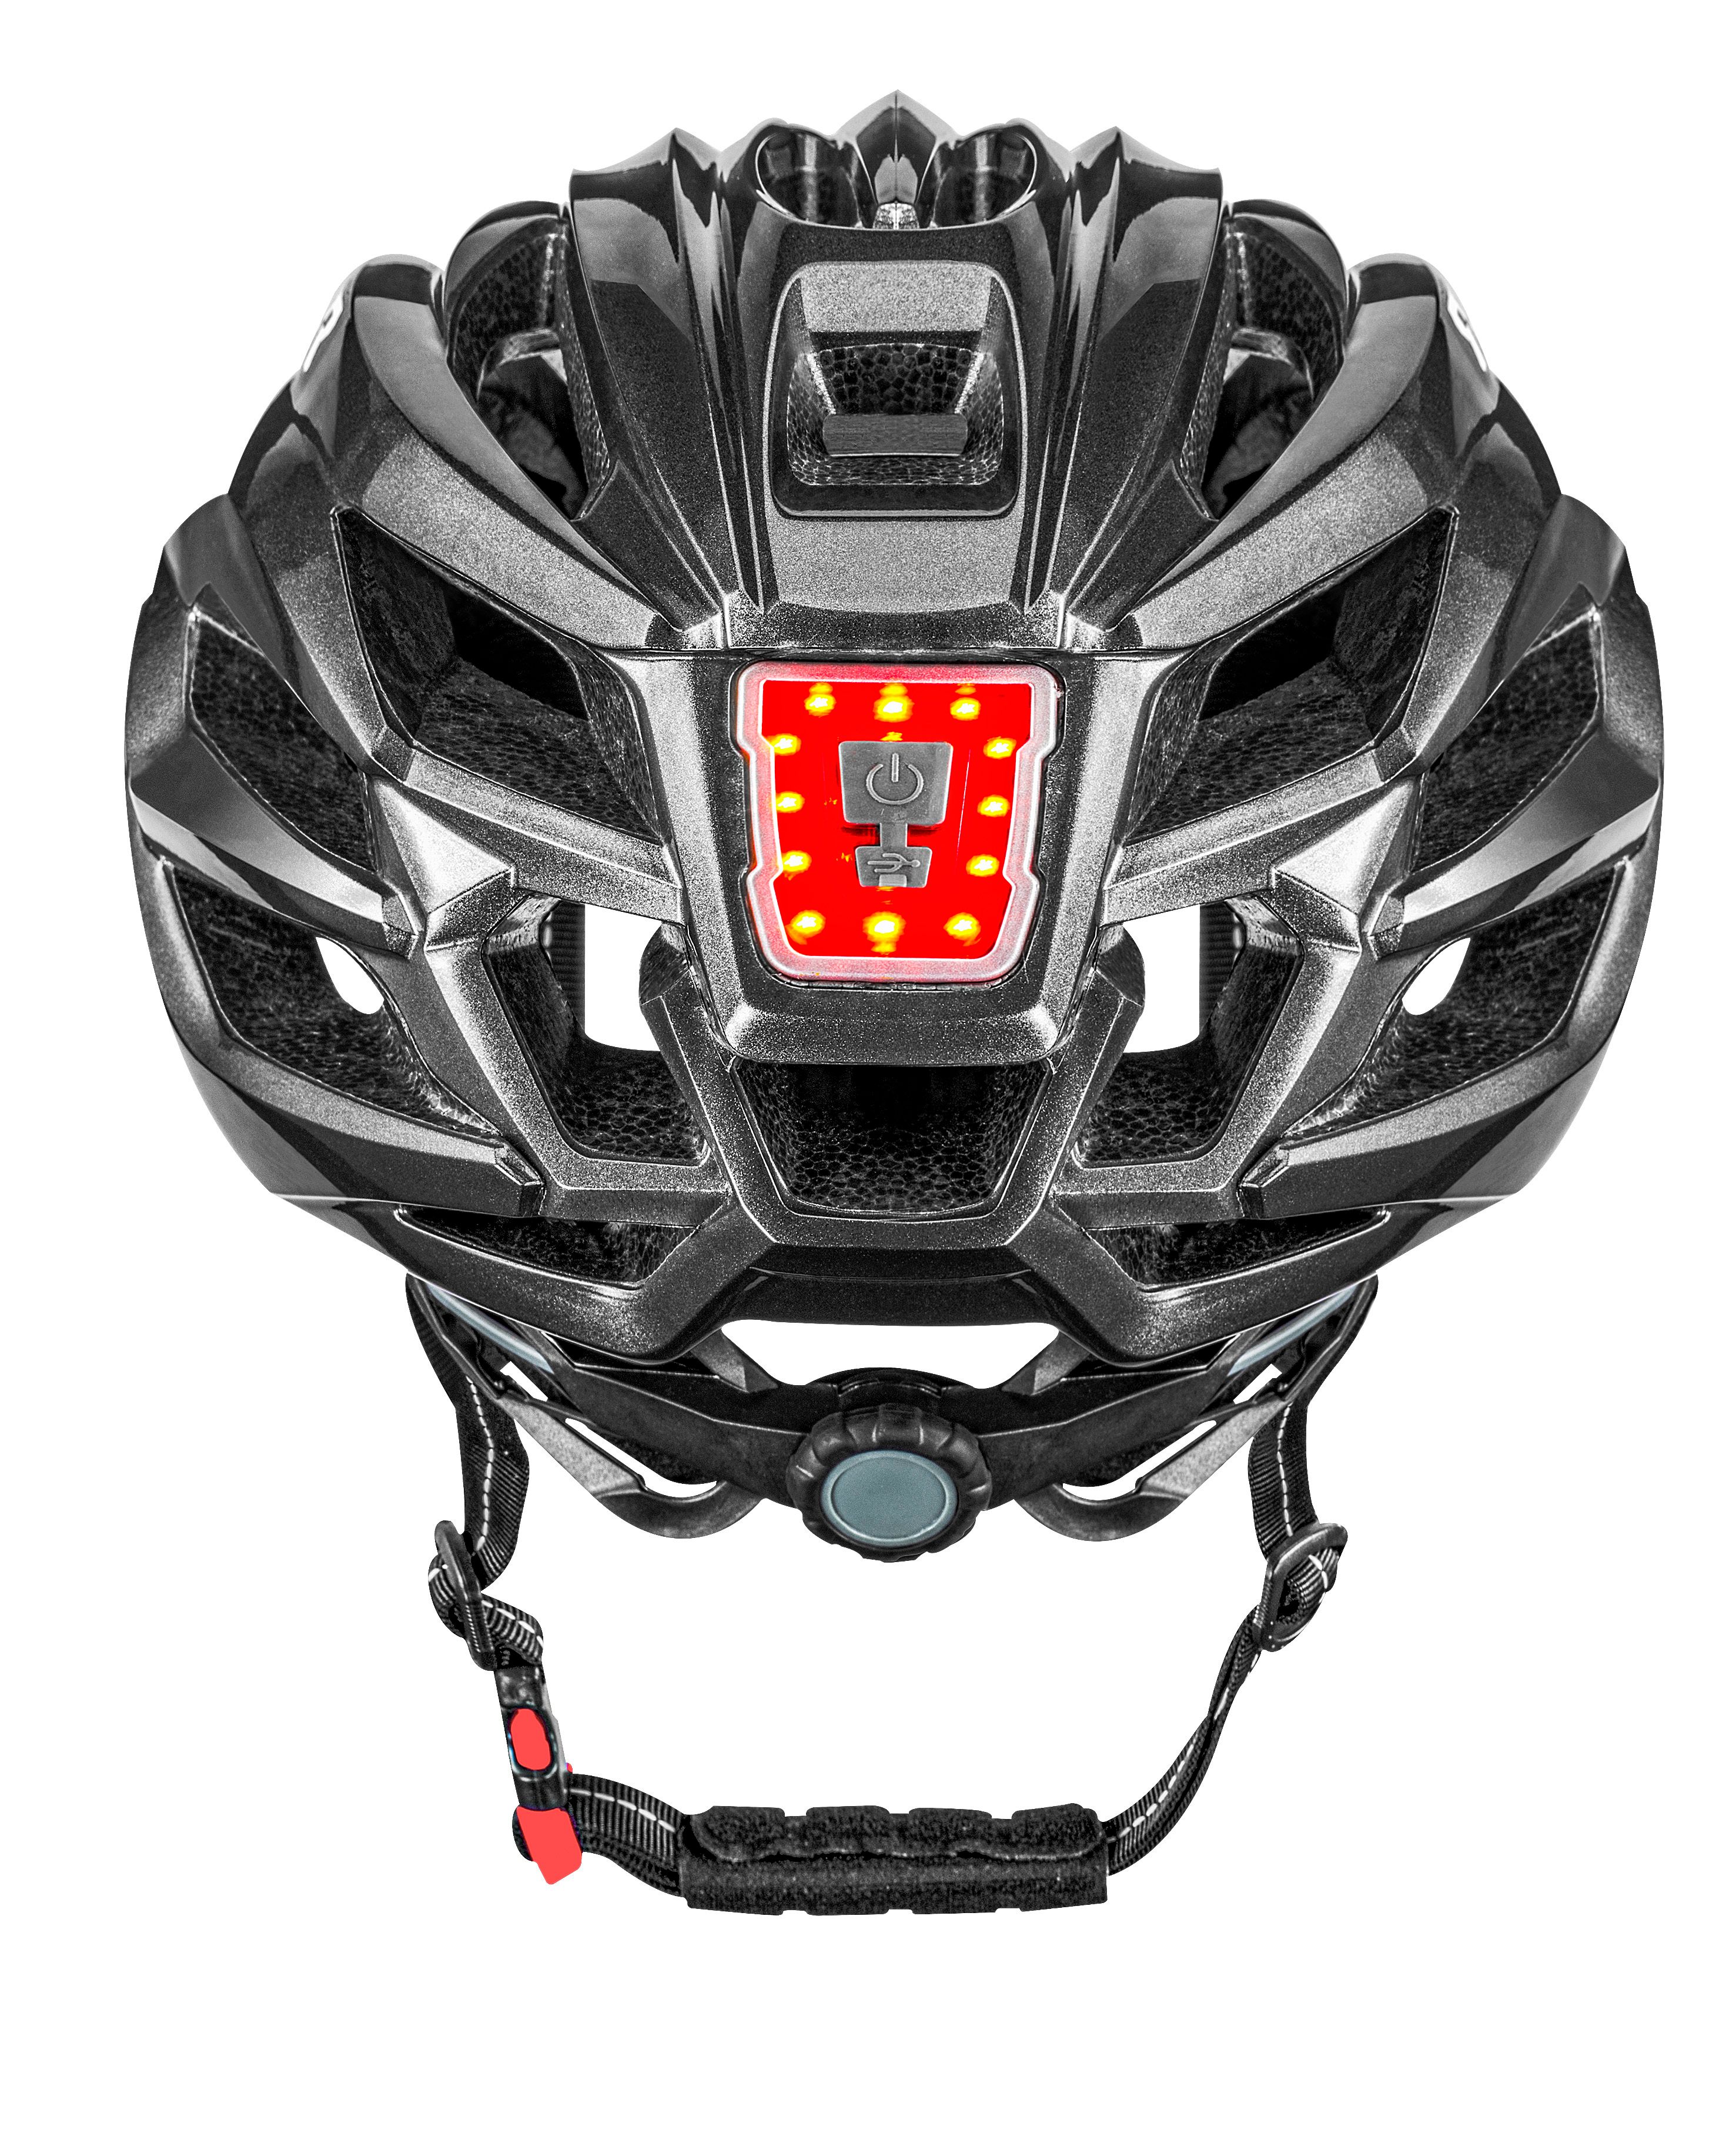 B3-26VL Bicycle Helmet with Visor and rear LED warning light